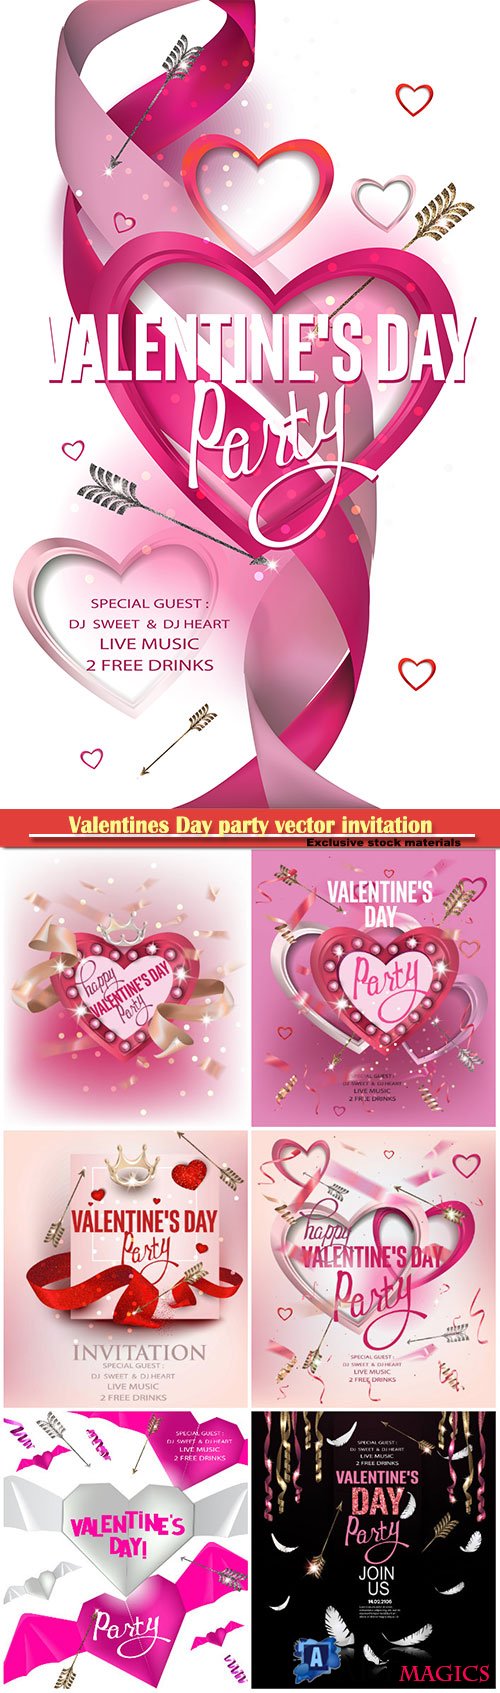 Valentines Day party vector invitation card with heart